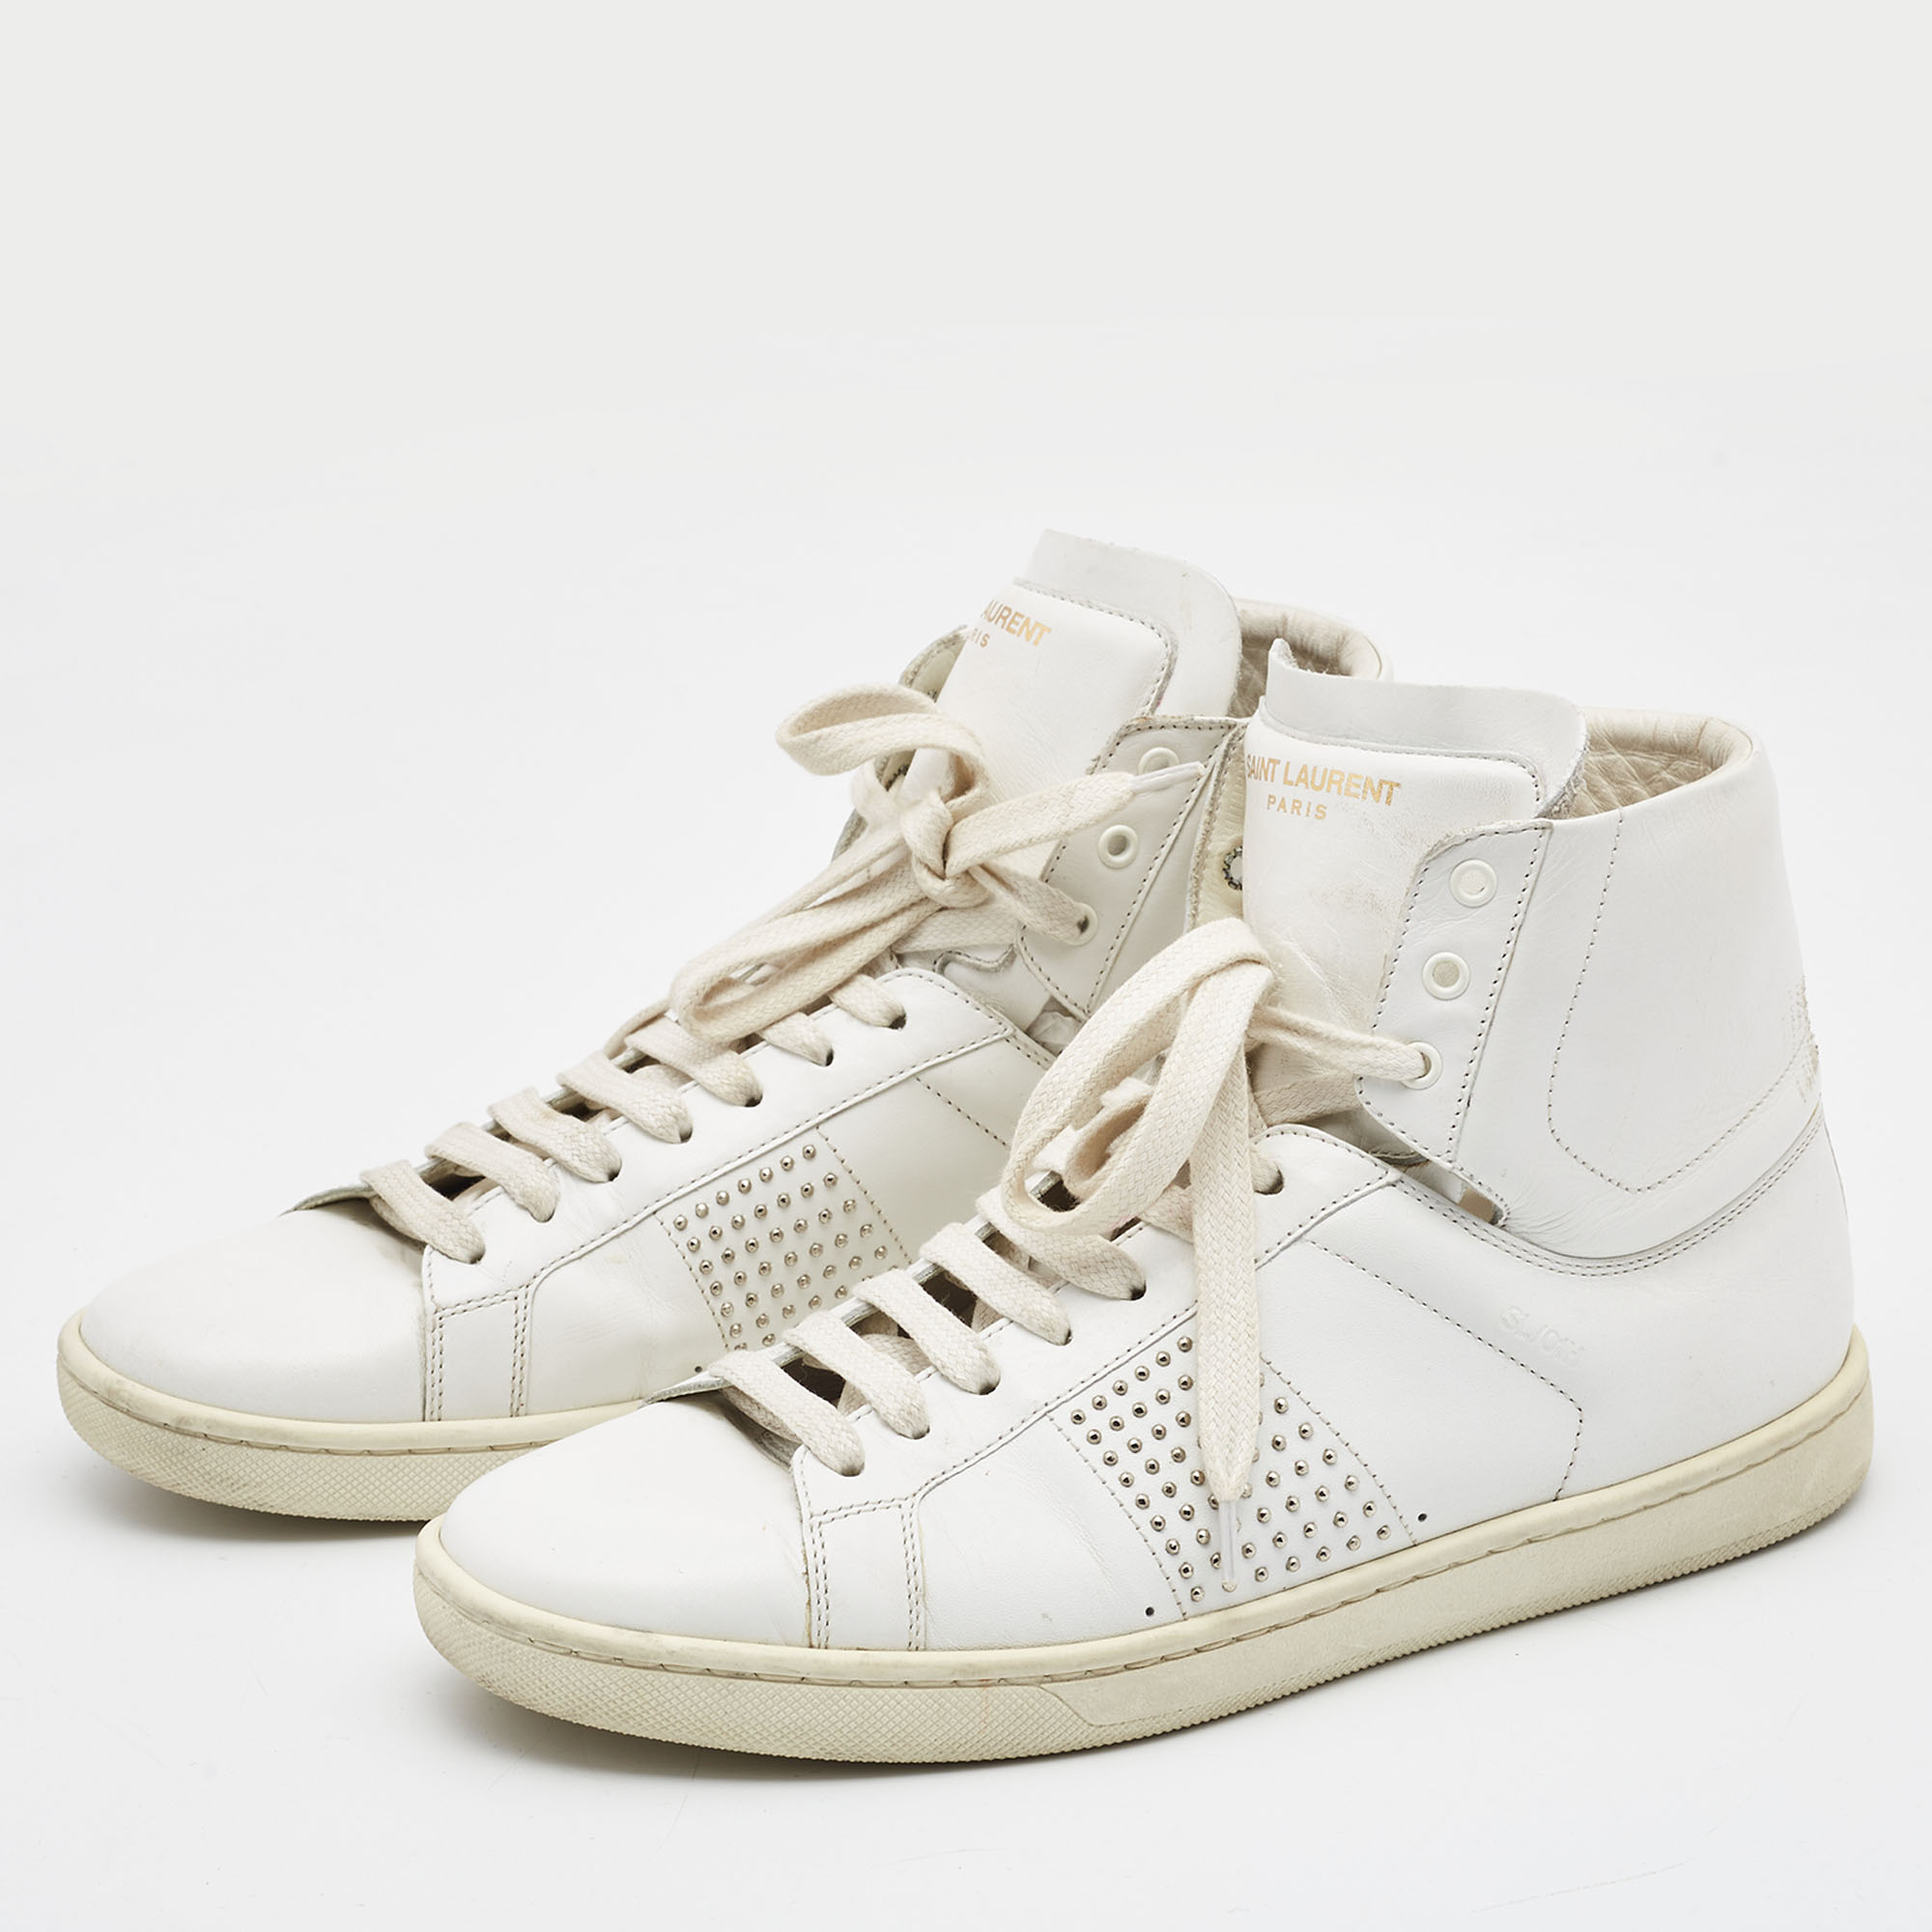 

Saint Laurent White Leather Studded High Top Sneakers Size